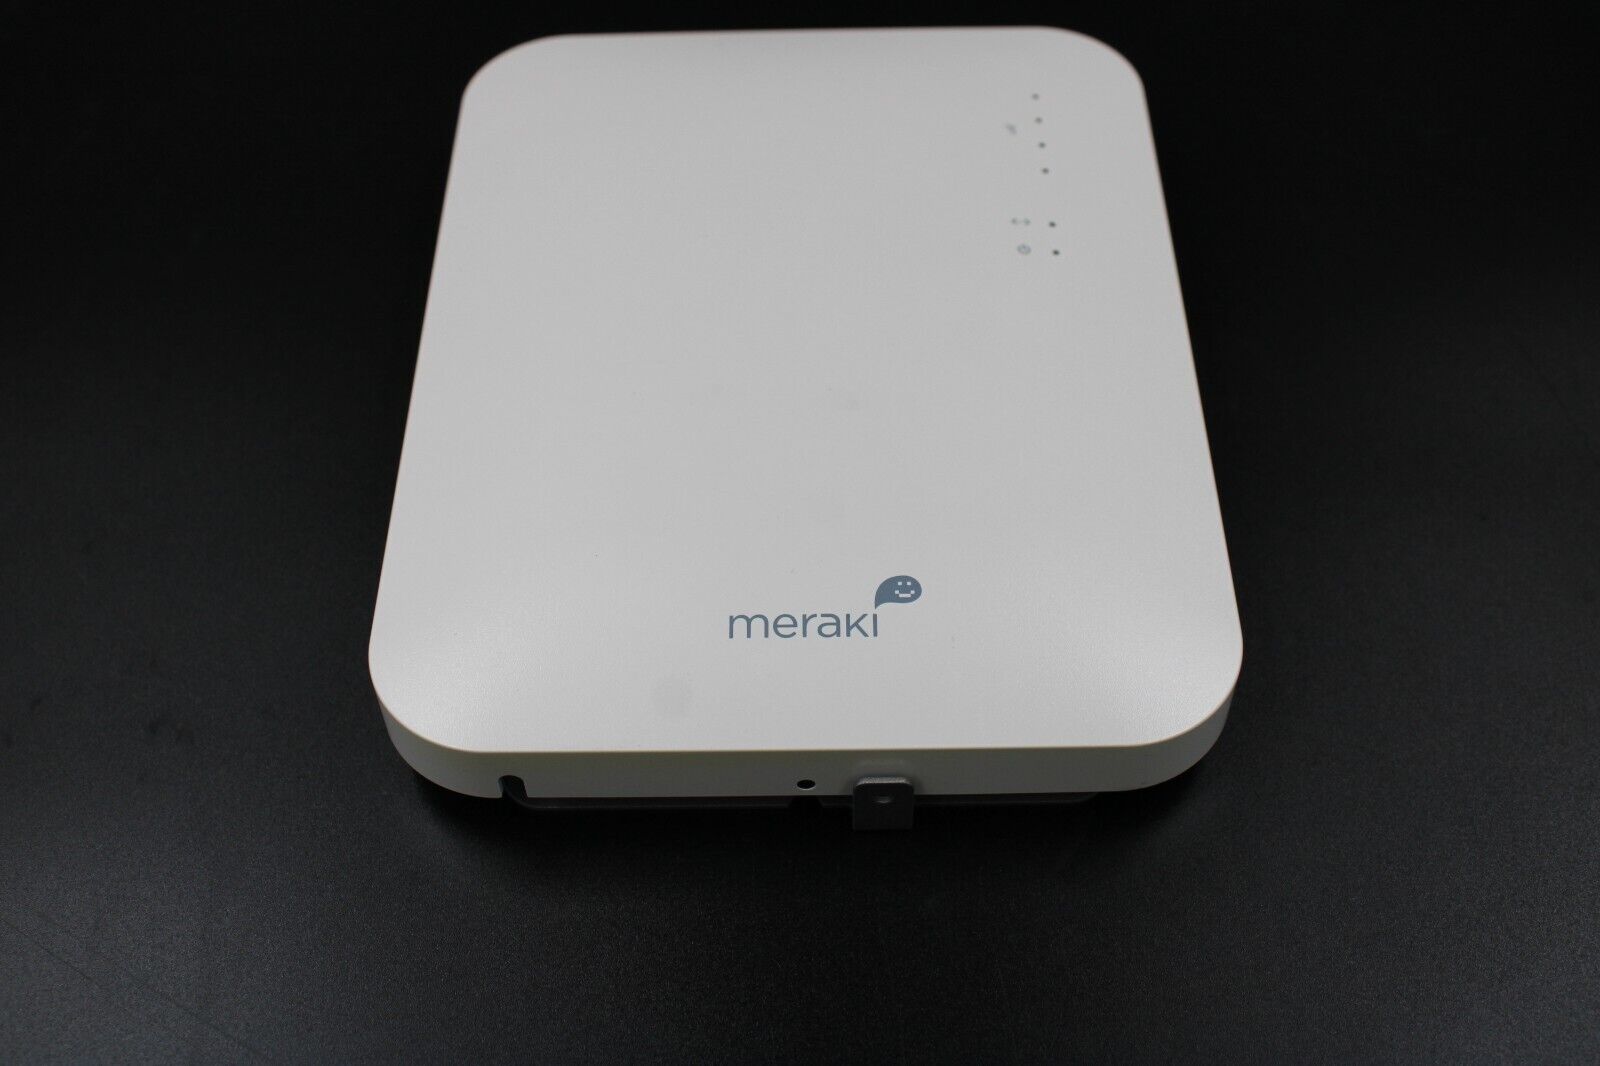 Cisco Meraki MR16 Dual-Band Cloud Managed Wireless Access Point Unclaimed